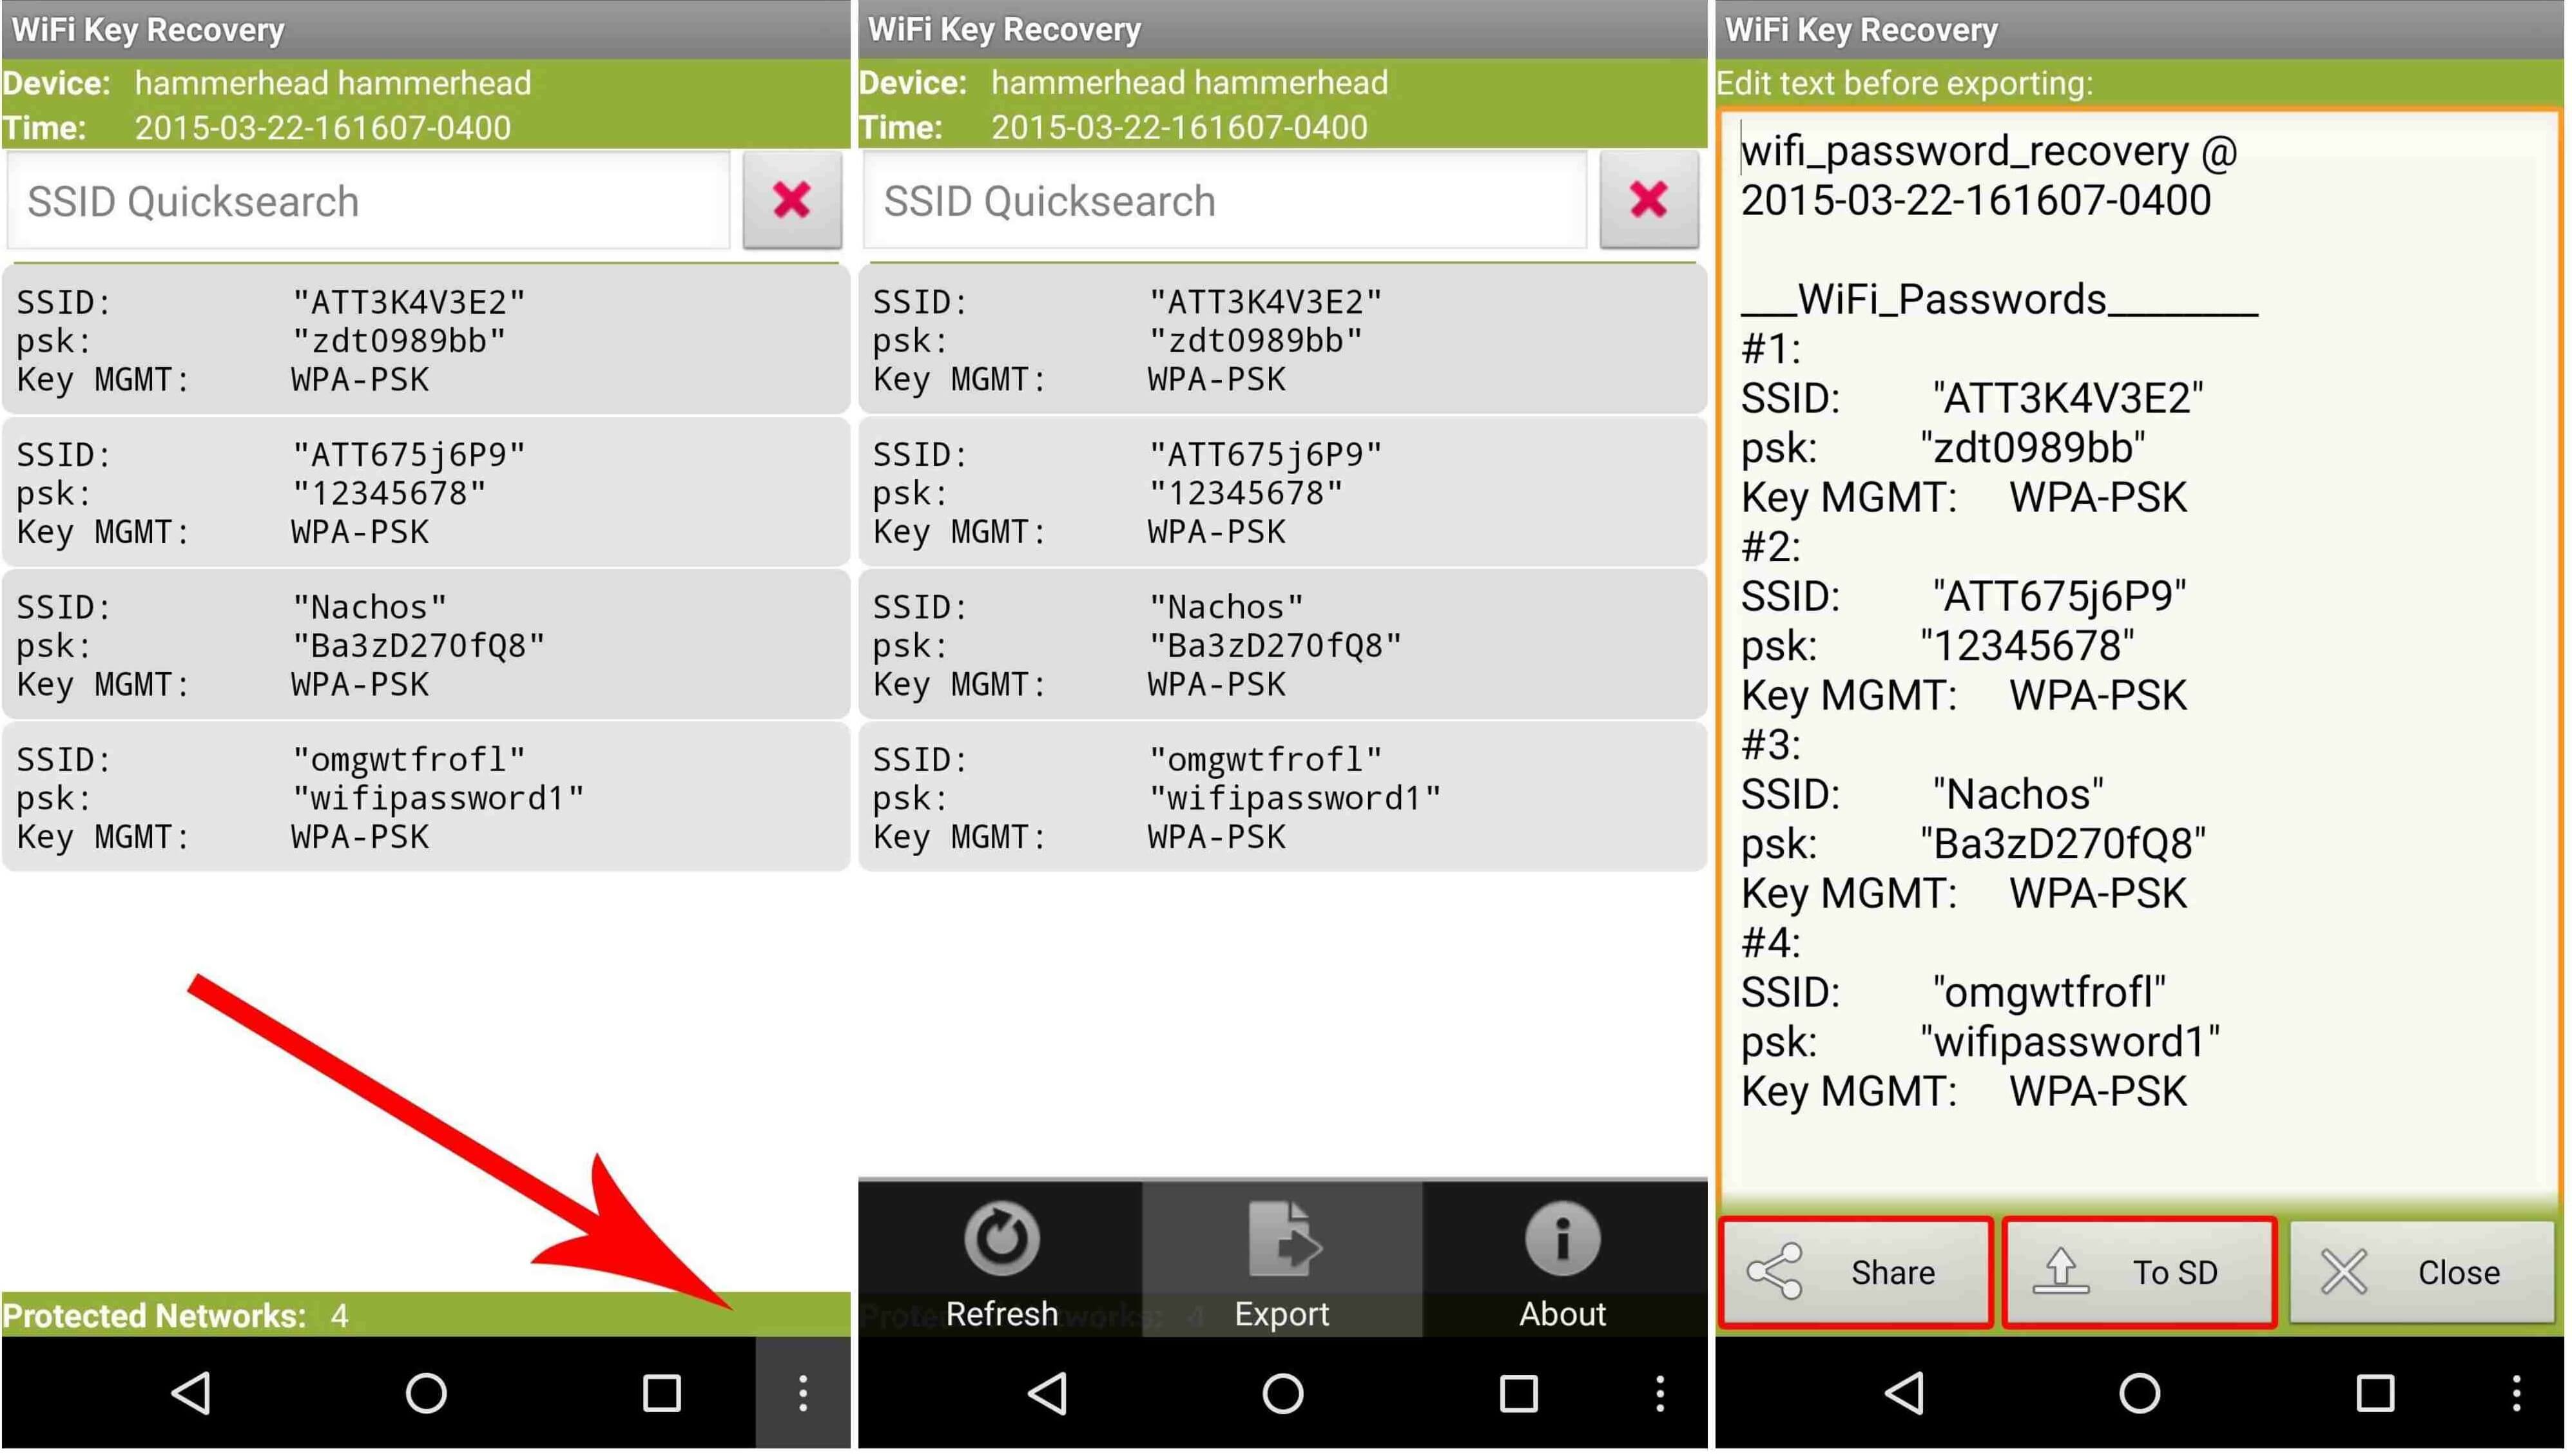 View Saved Wifi Password on Android